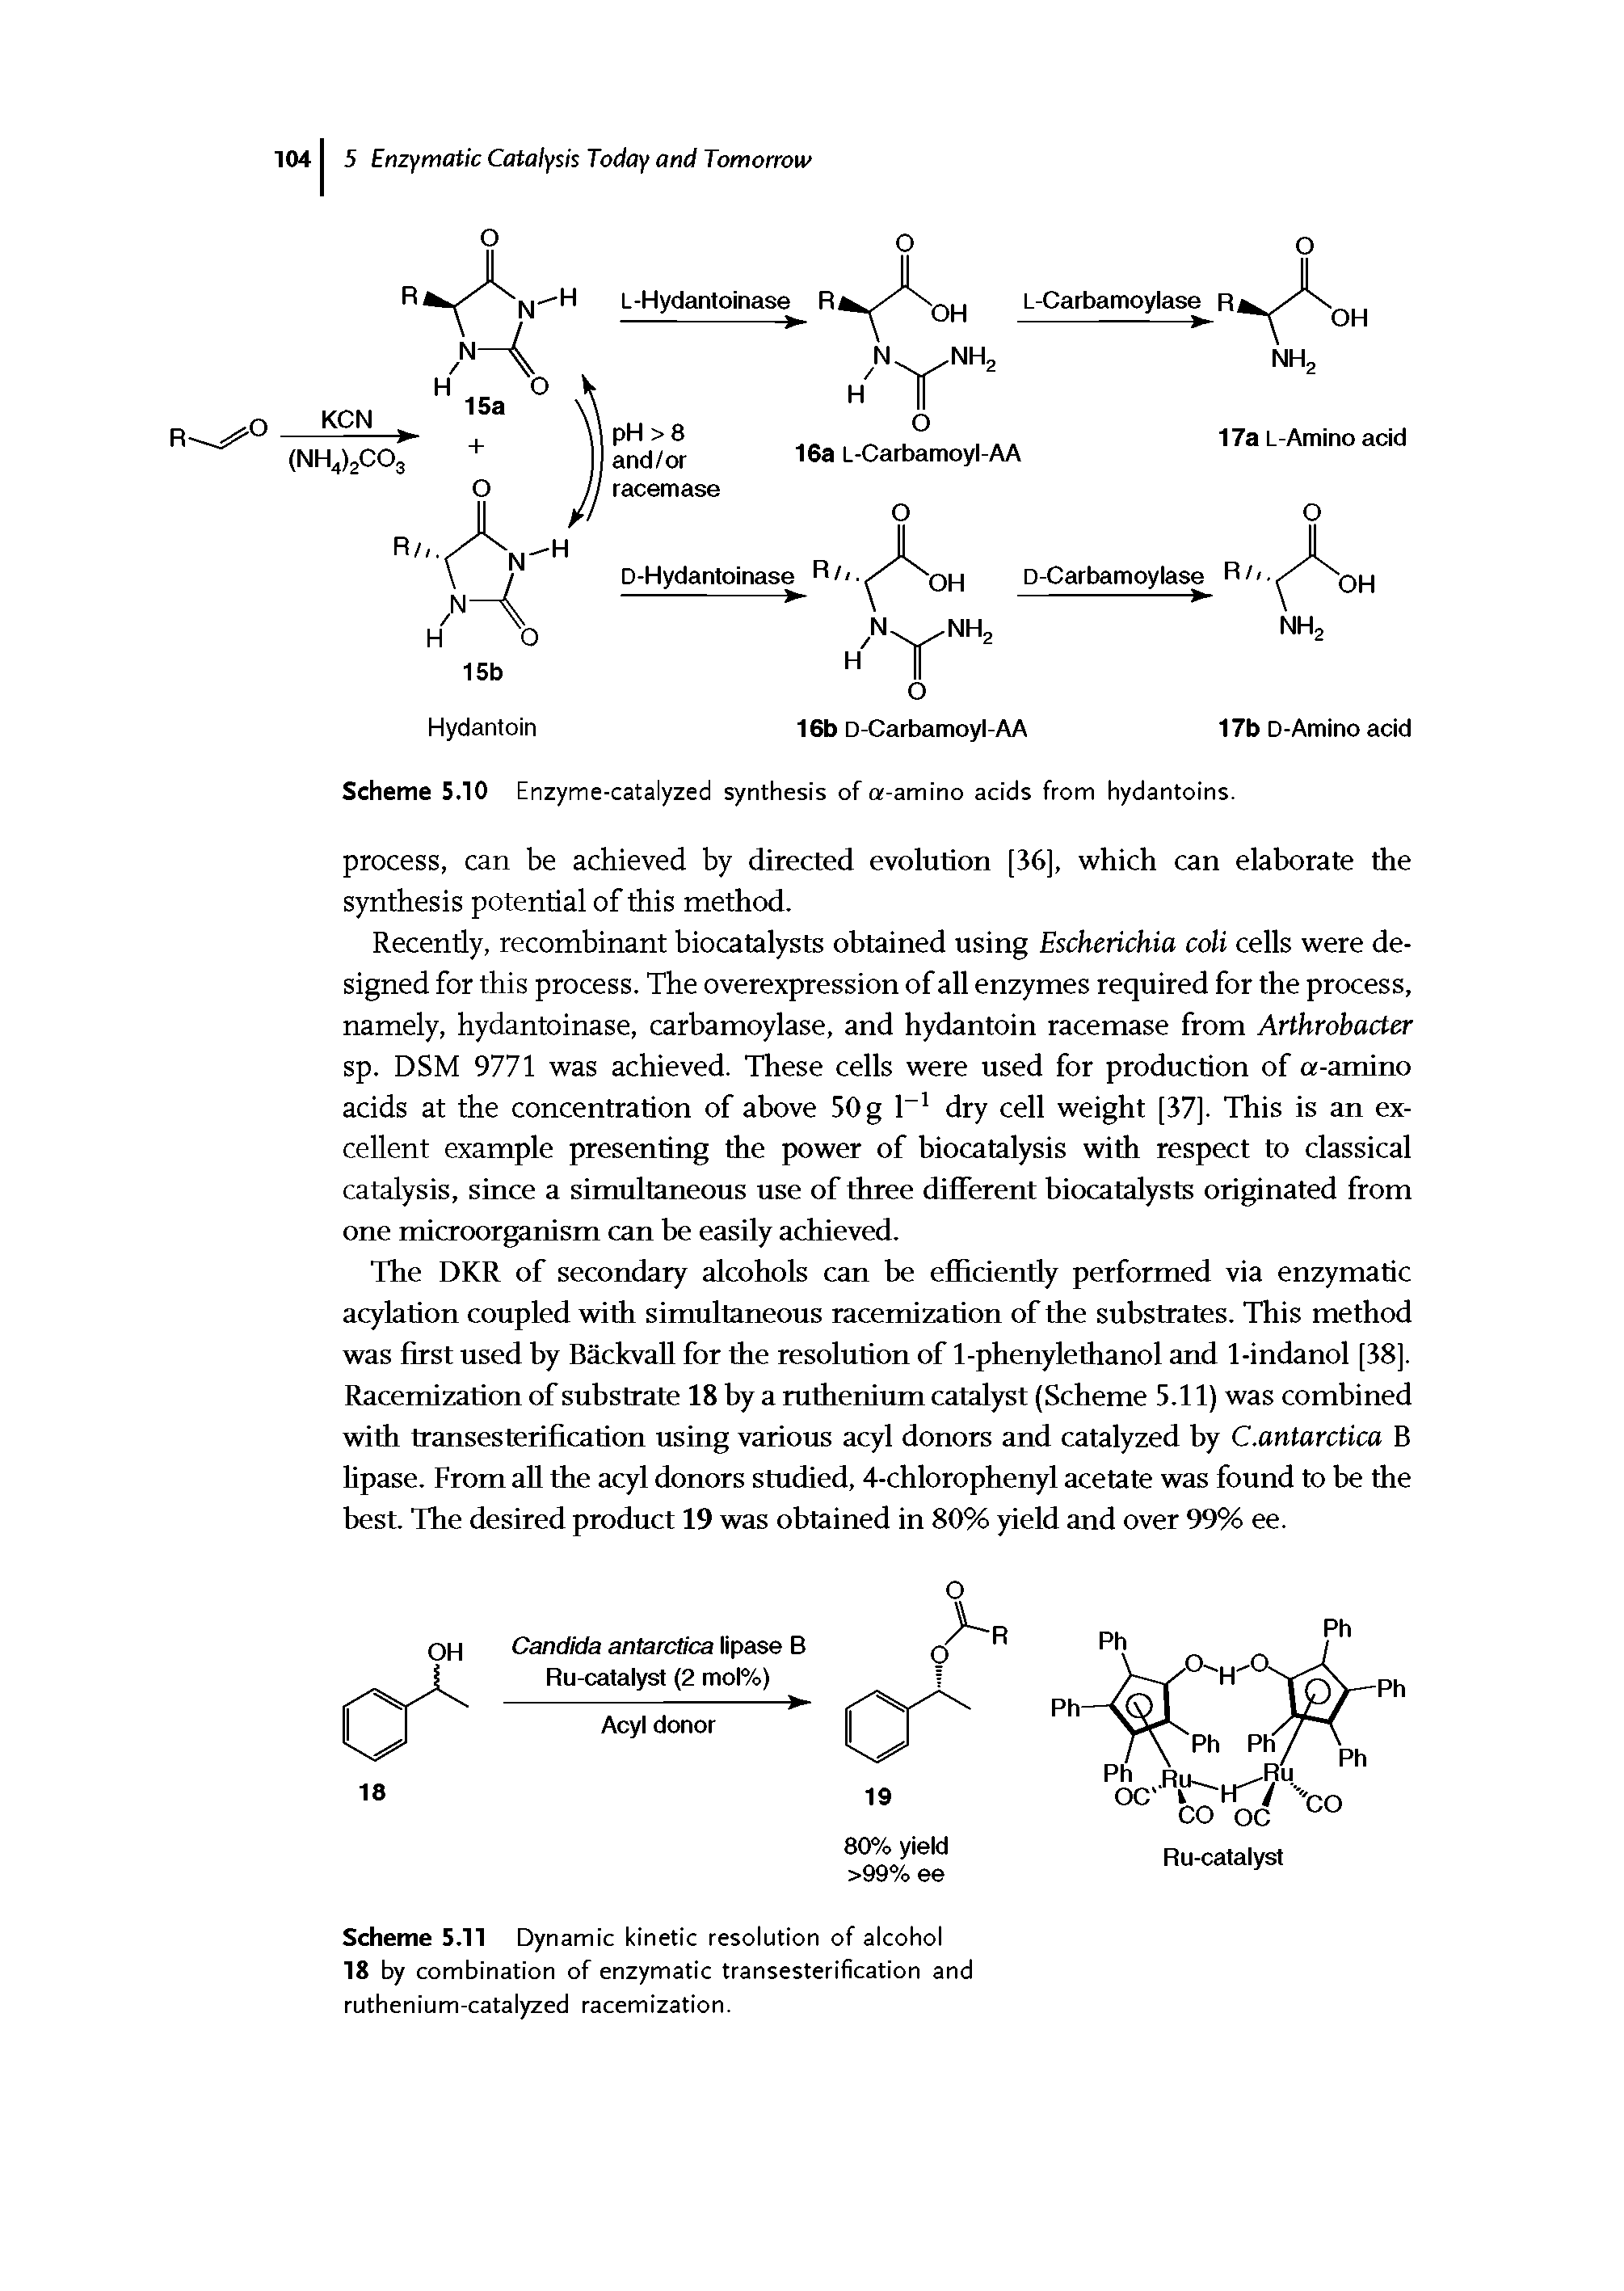 Scheme 5.11 Dynamic kinetic resolution of alcohol 18 by combination of enzymatic transesterification and ruthenium-catalyzed racemization.